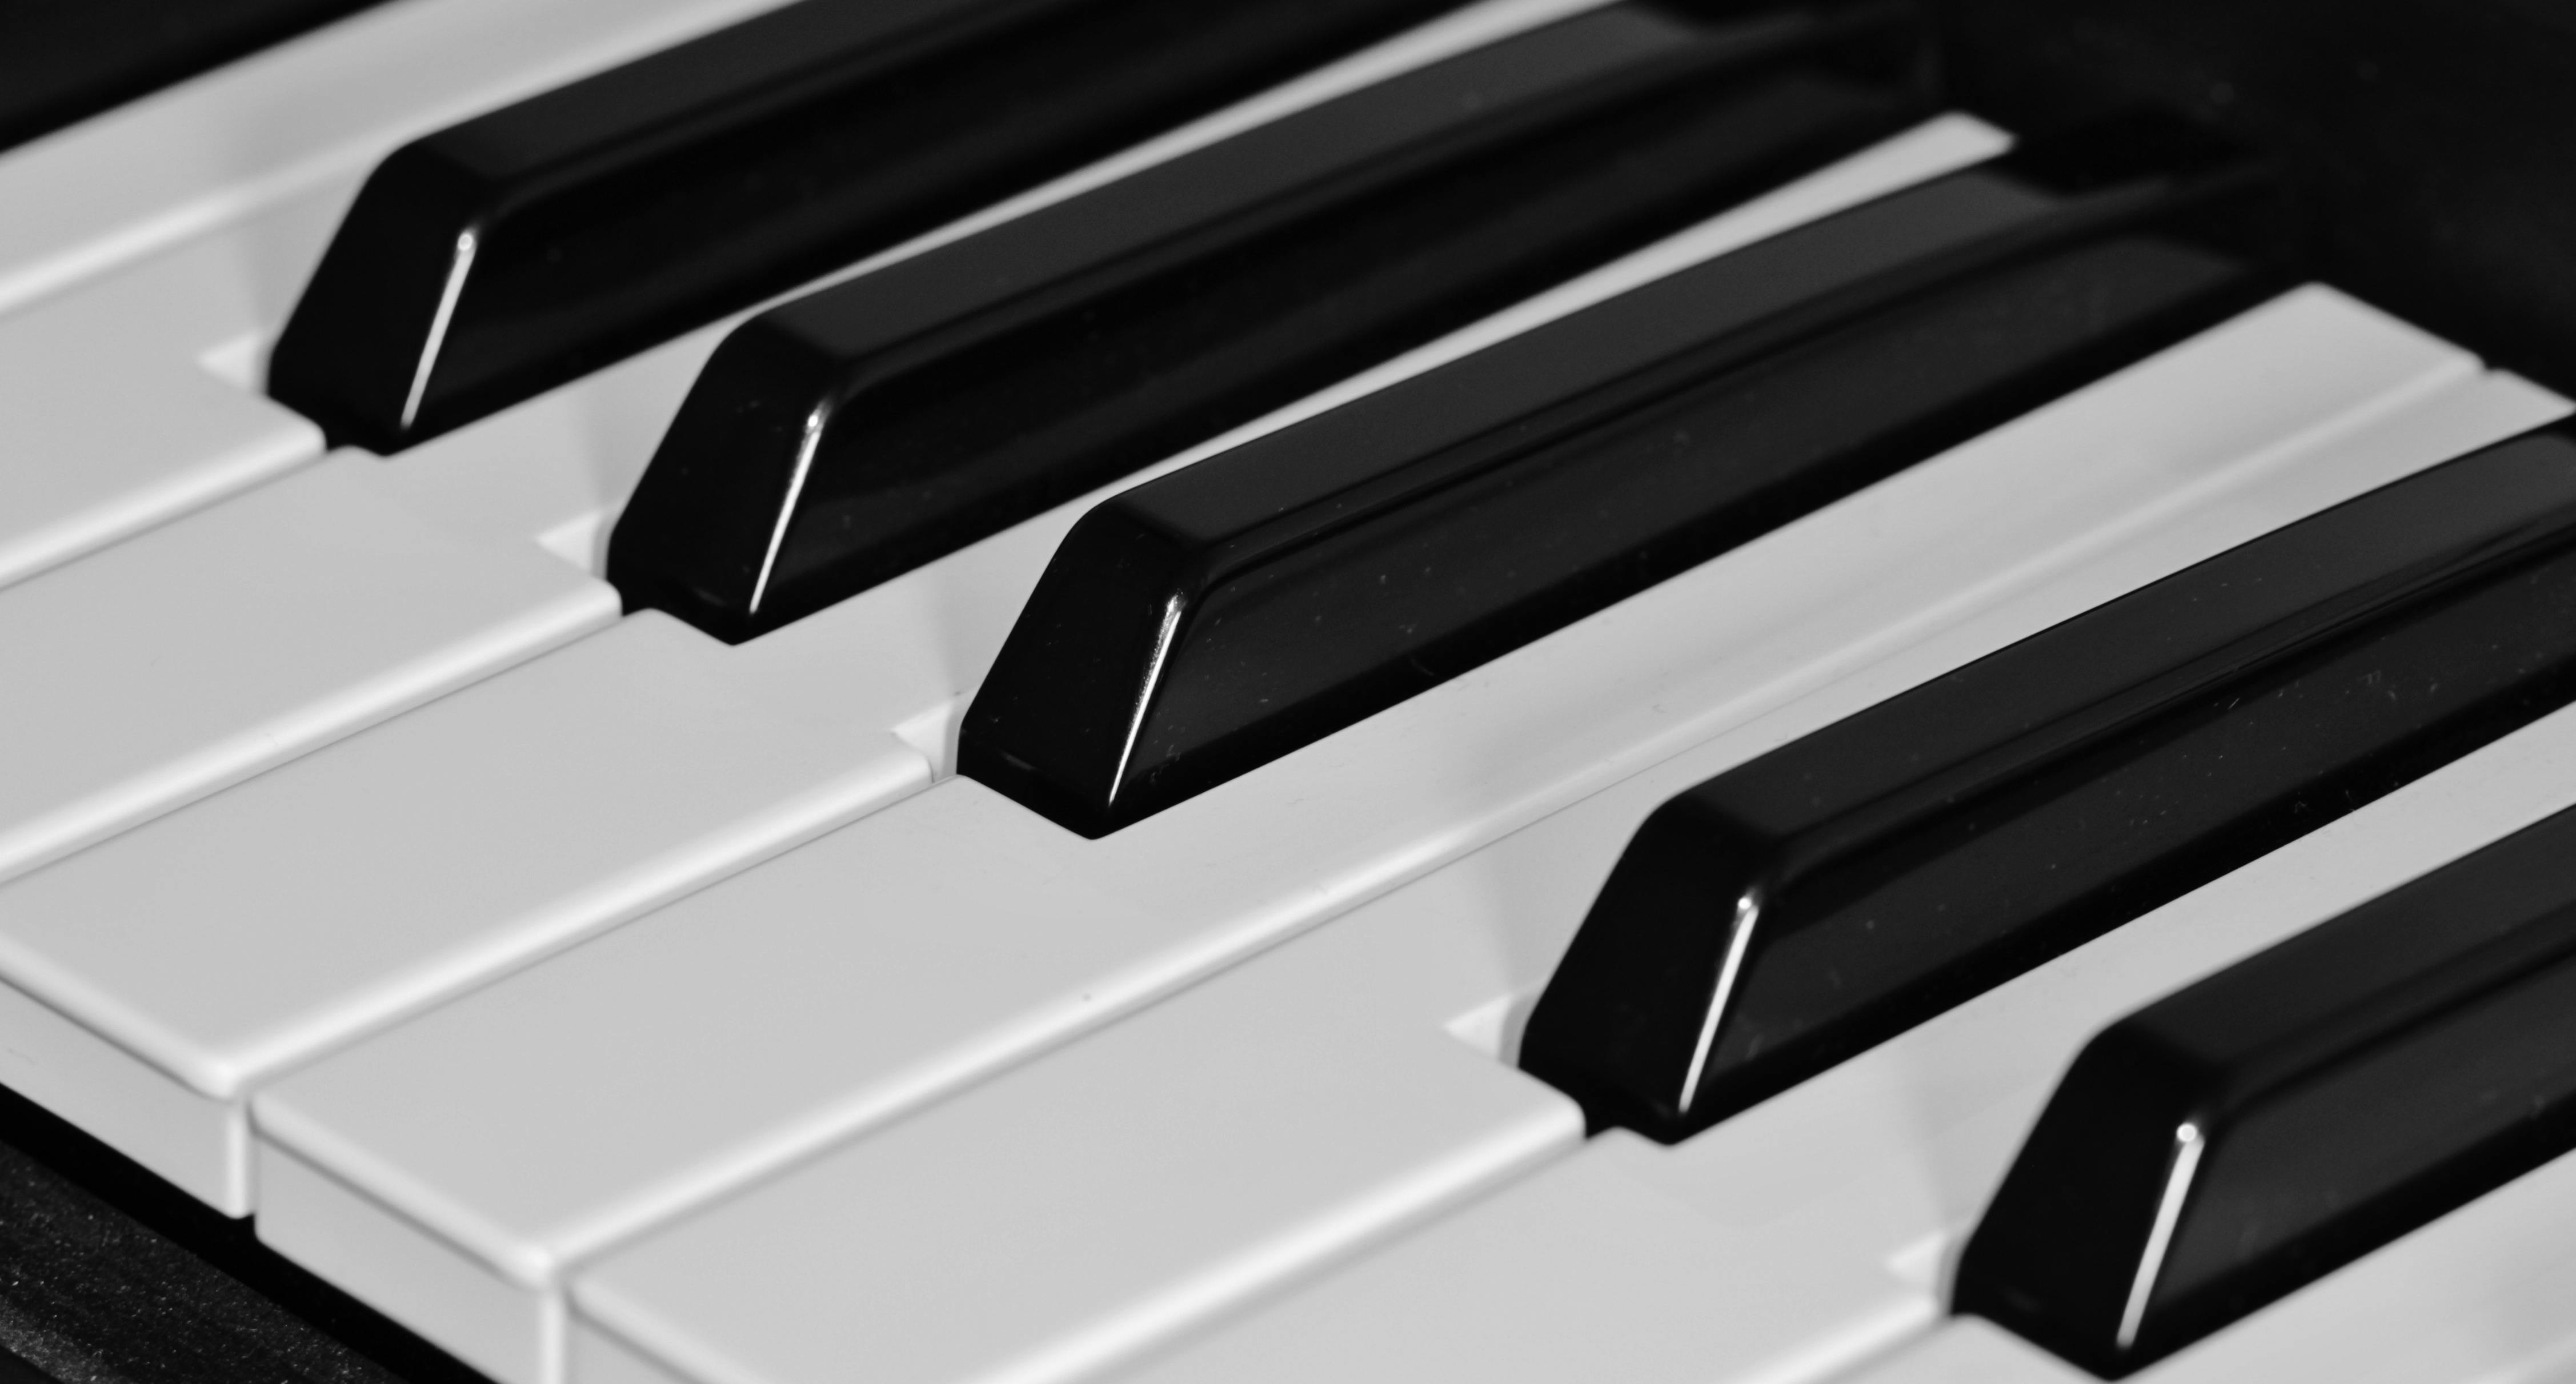 Piano White Little for ios download free